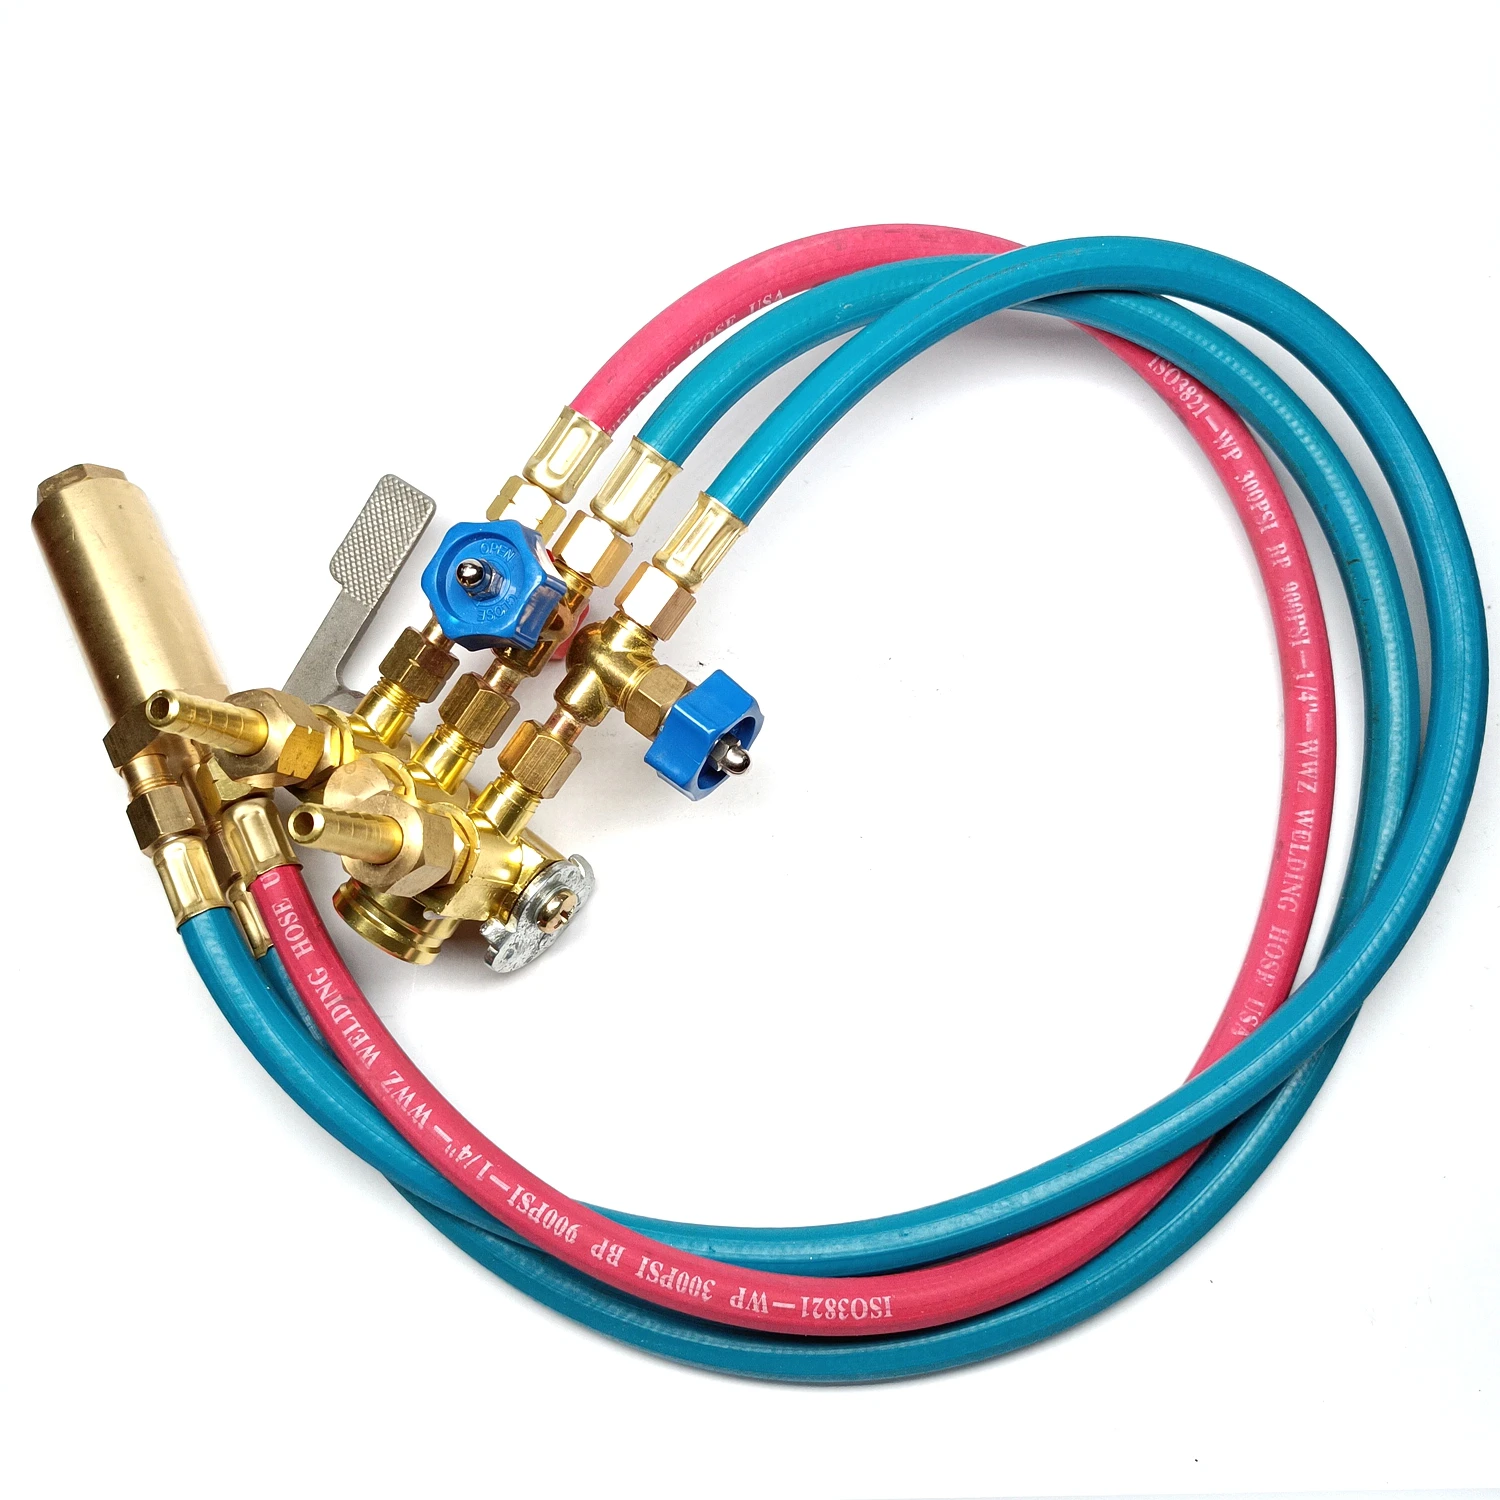 

CG1-30 CG30 G02 G03 ANME Acetylene PNME Propane Flame Cutting Machine Gas Cutter Hose Torch Part Assembly Quick Valve